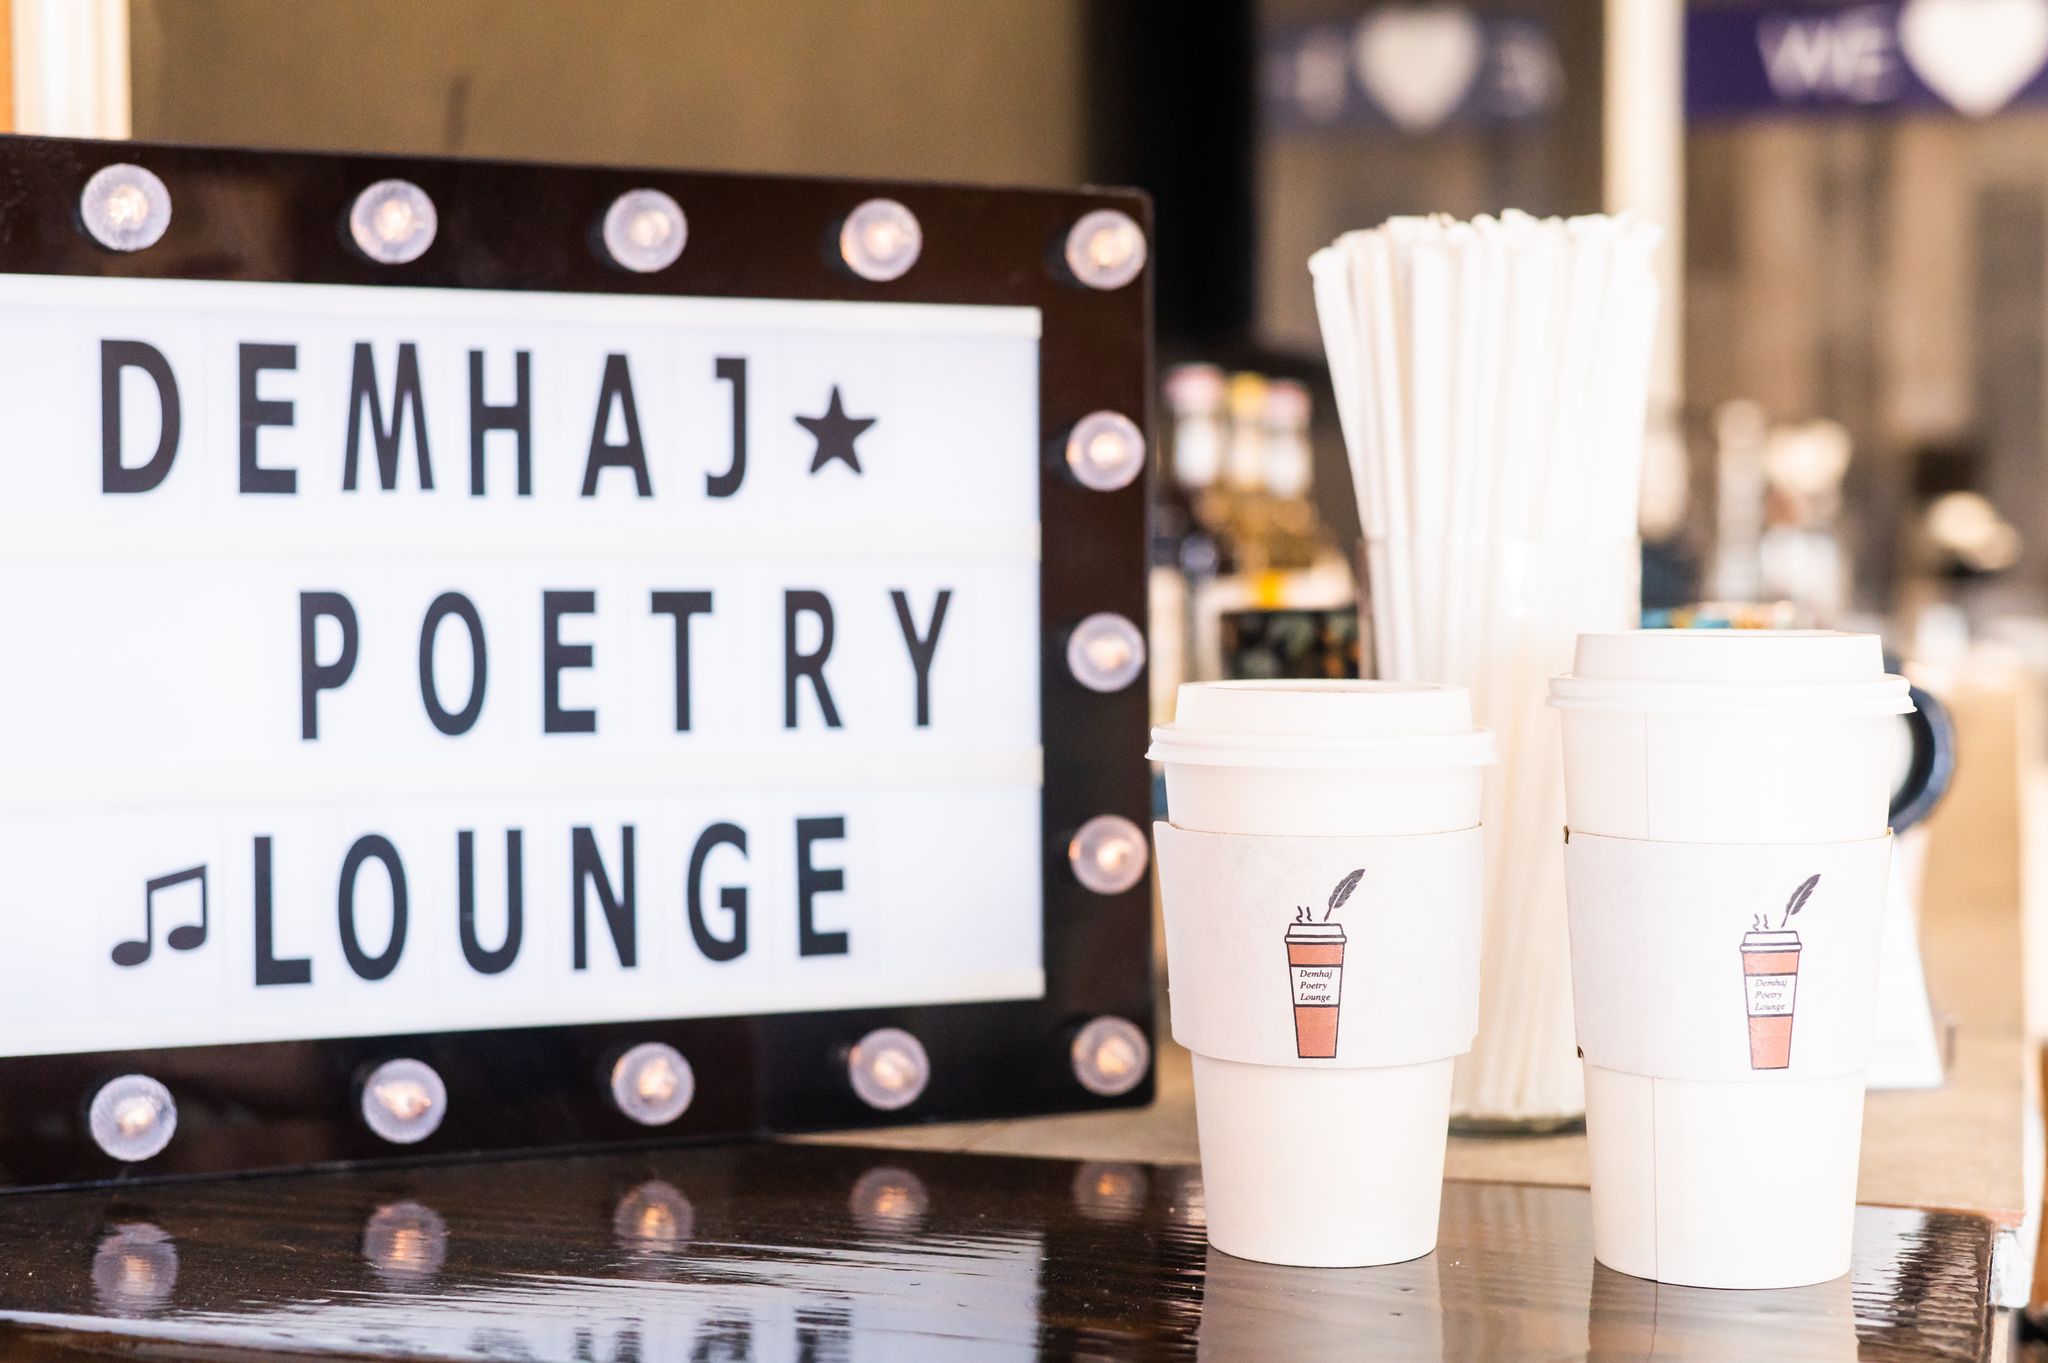 A sign that says Demhaj Poetry Lounge beside coffee cups in a coffee shop in High Point, NC.